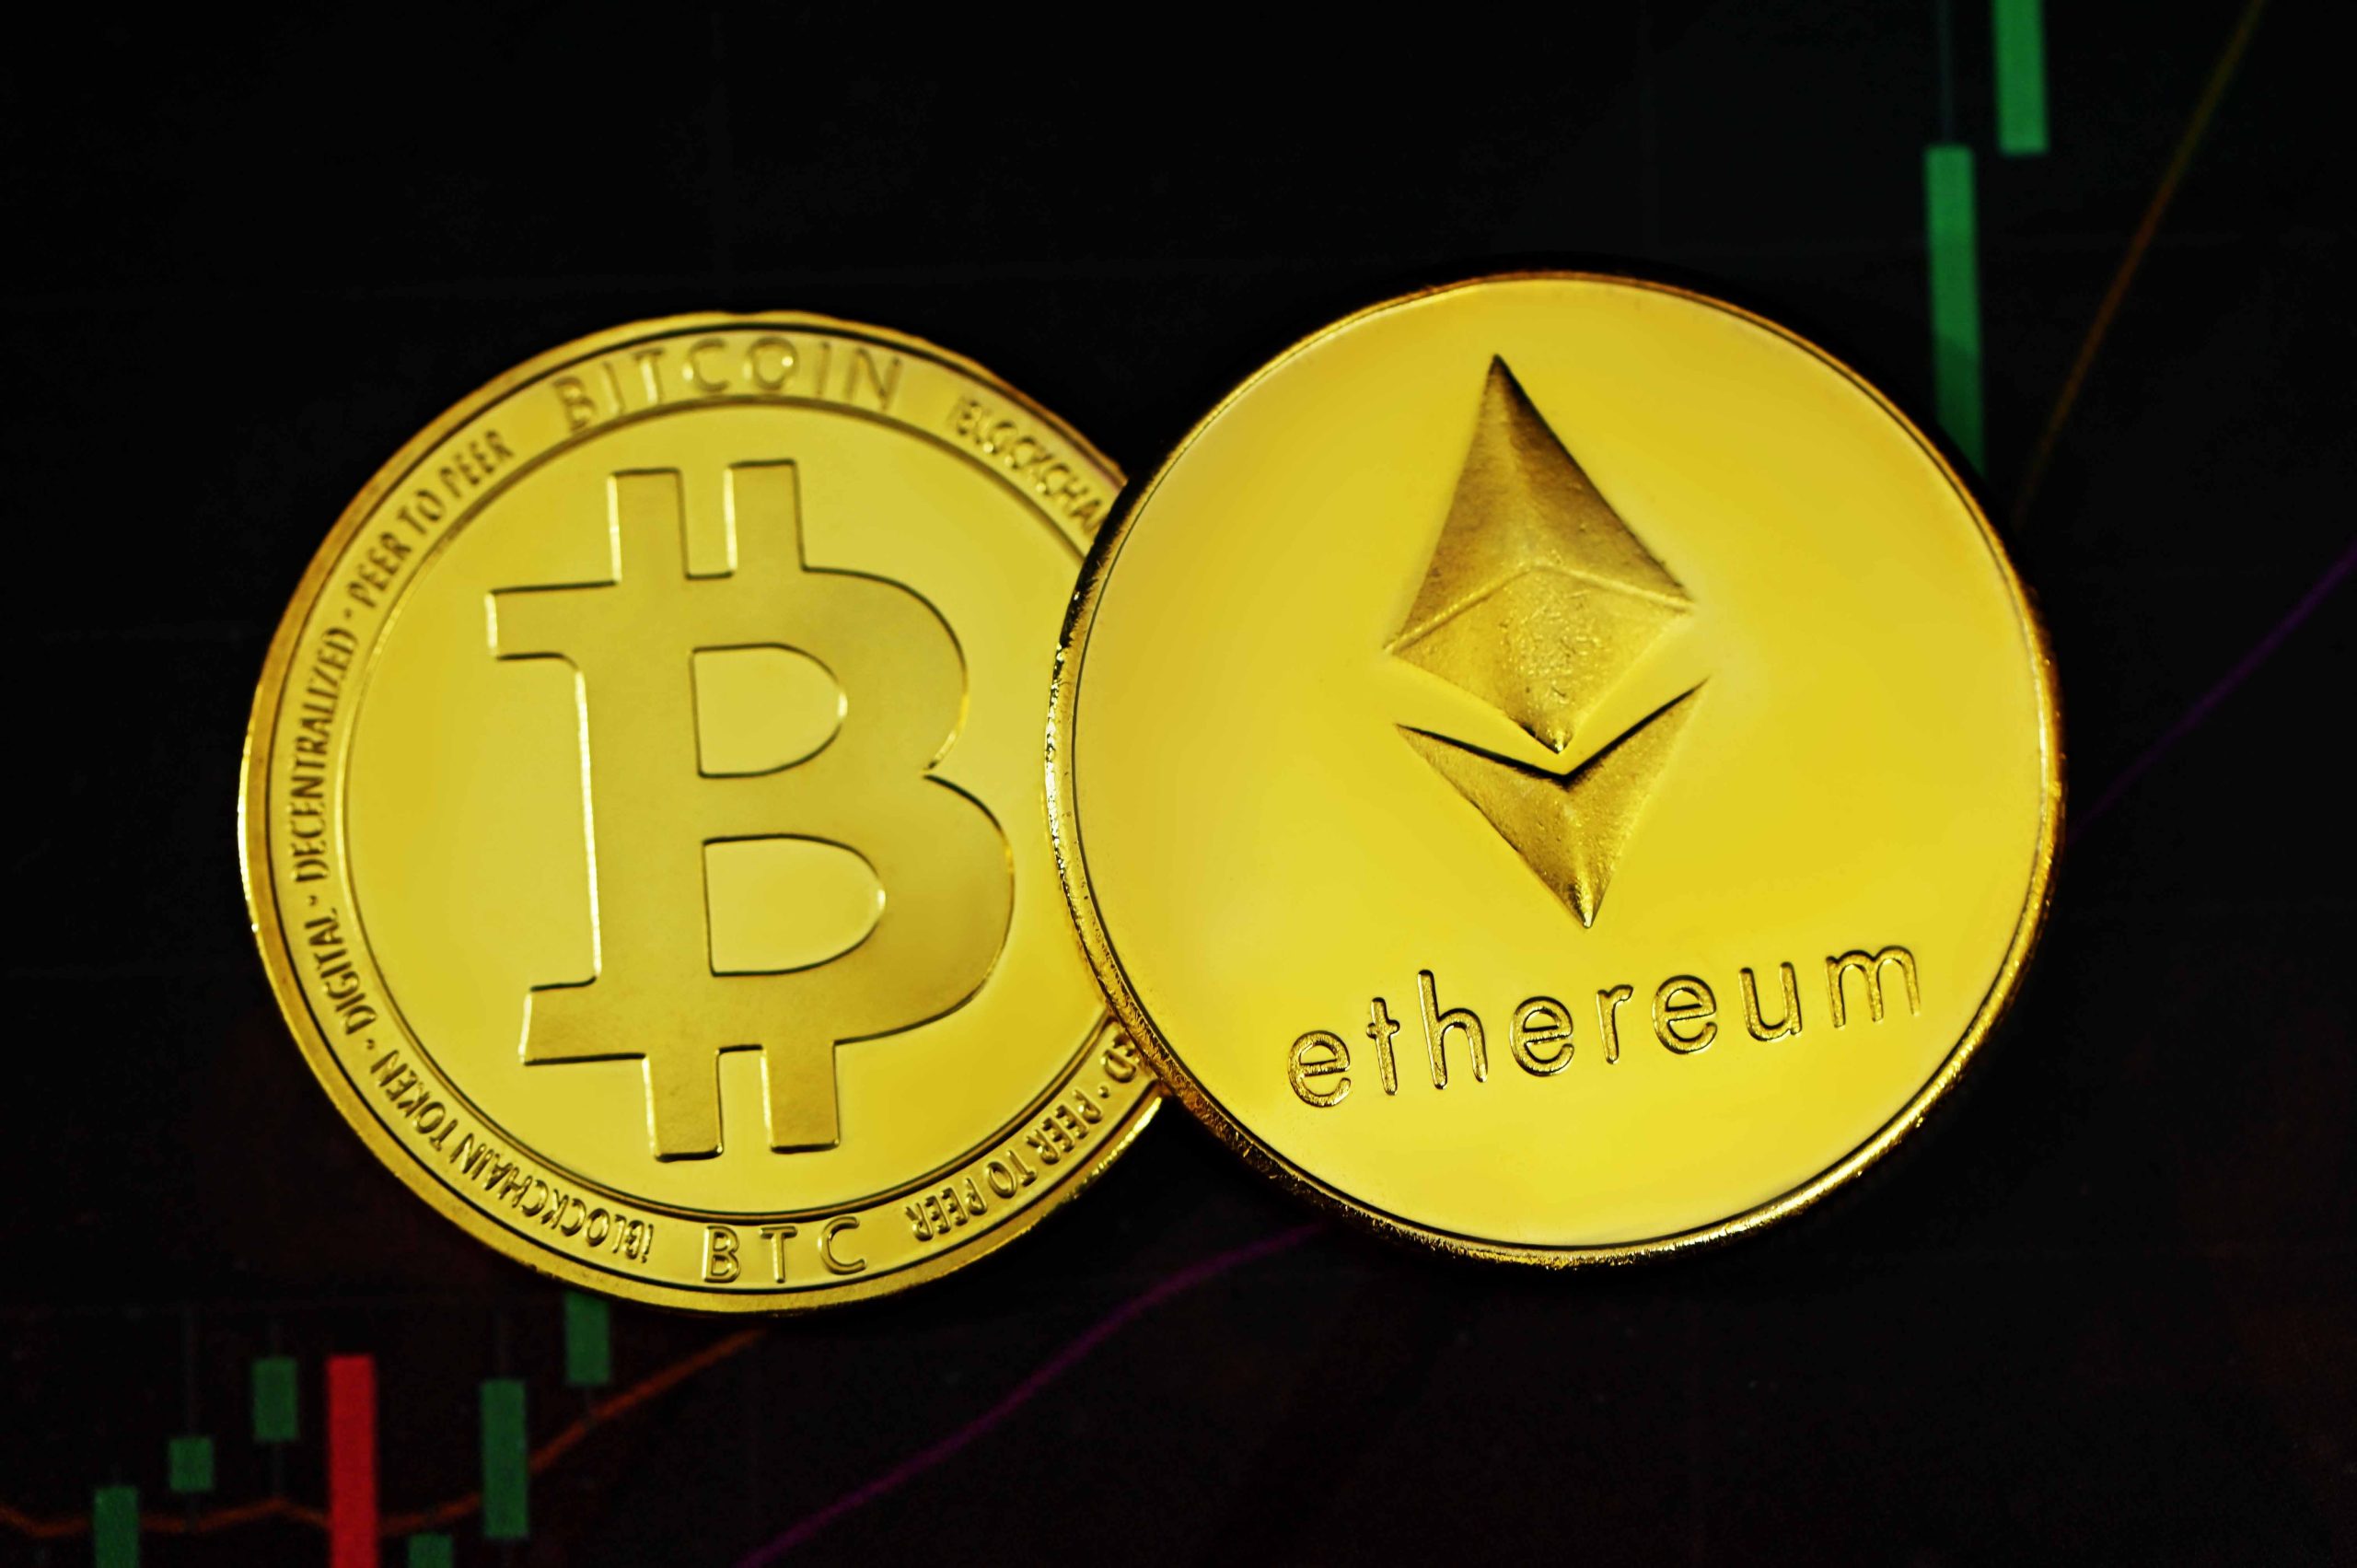 Bitcoin vs Ethereum: Which One is Better?